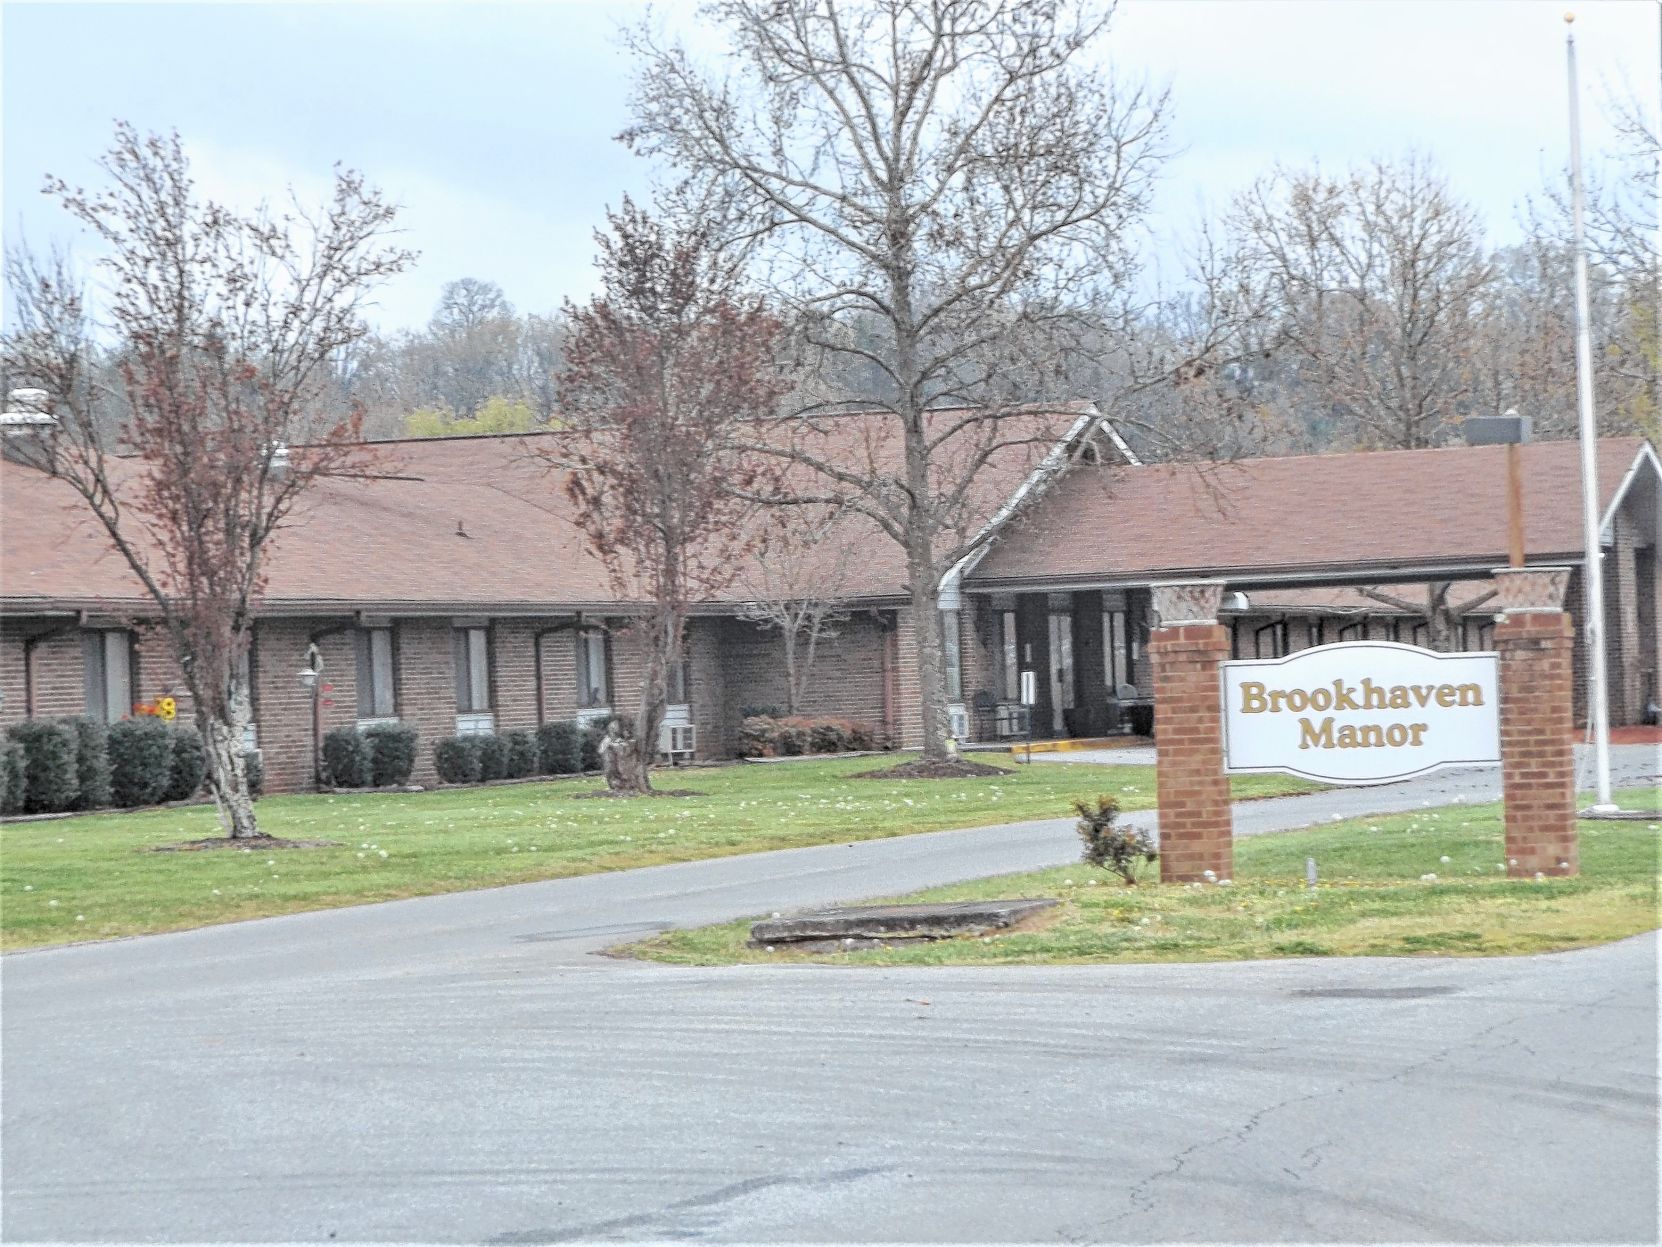 State orders Brookhaven Manor not to accept new residents Wellness timesnews